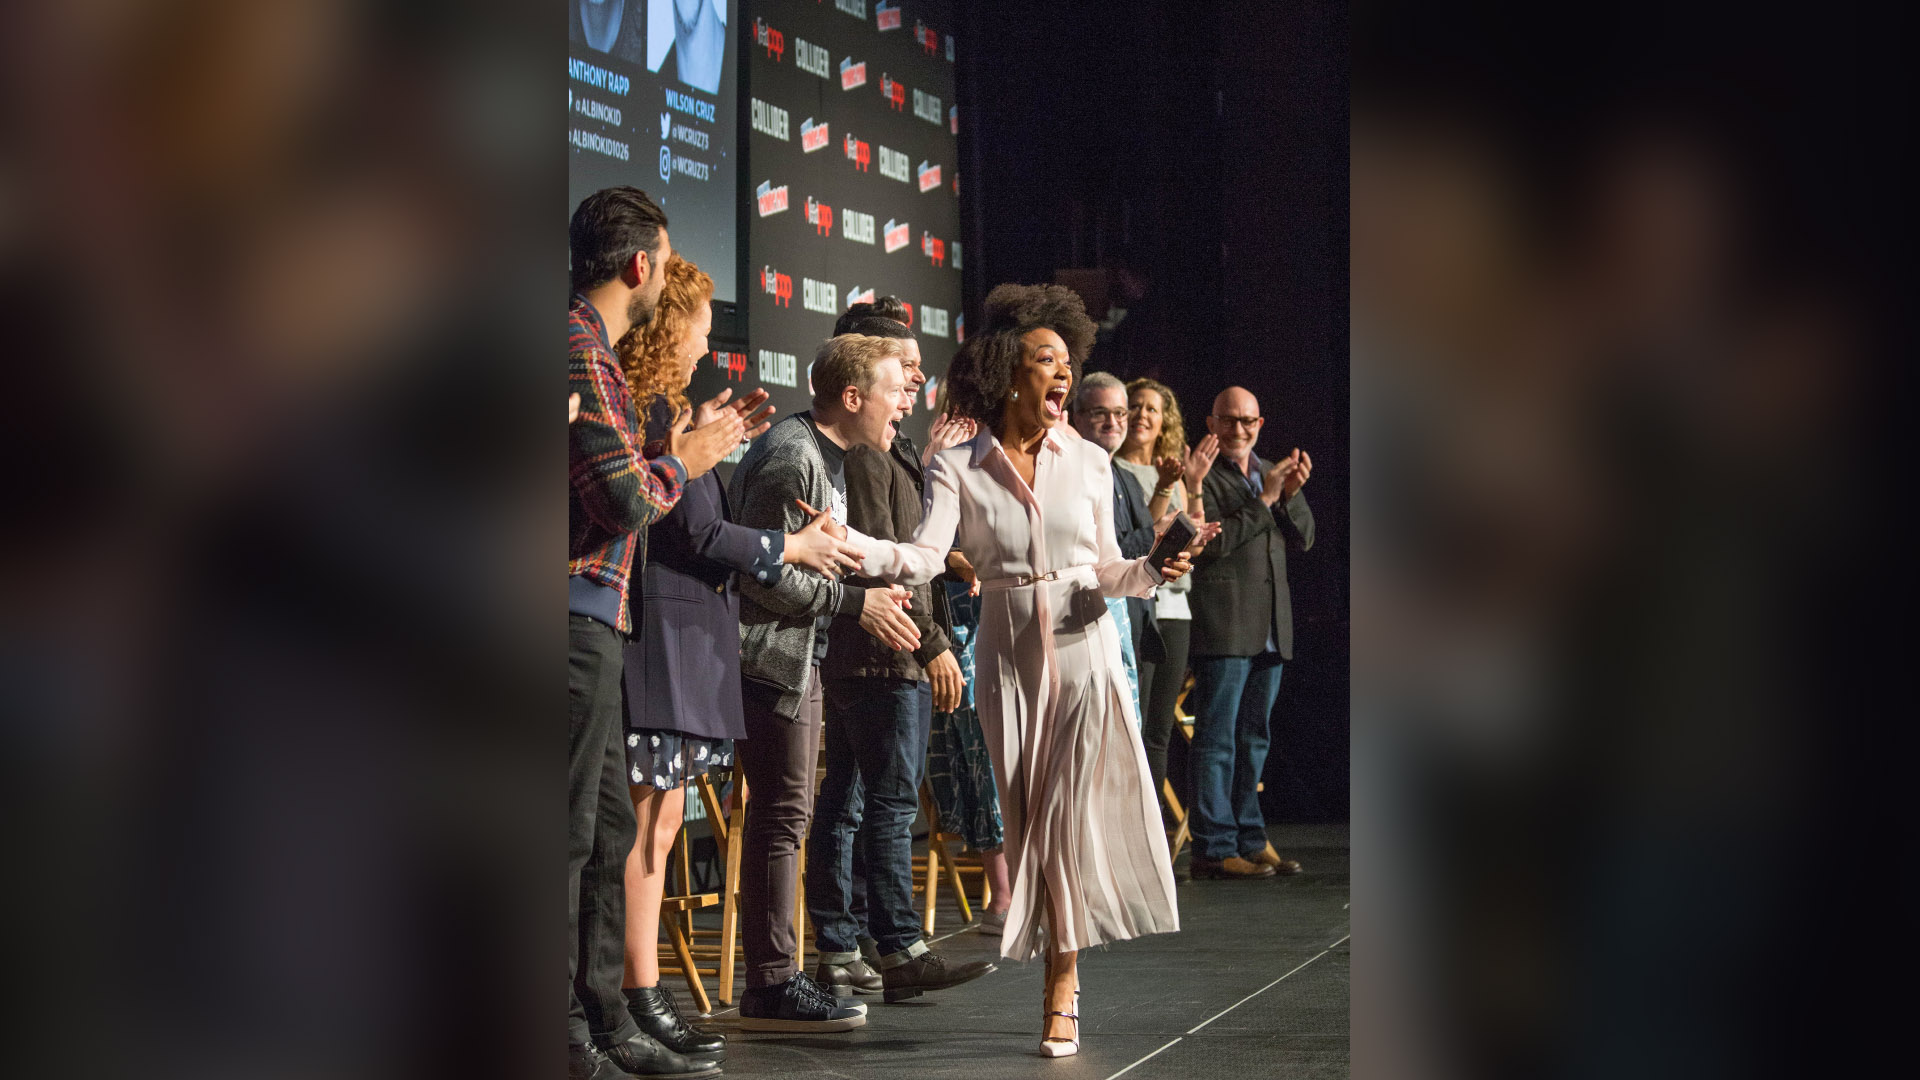 Sonequa Martin-Green with the cast and crew